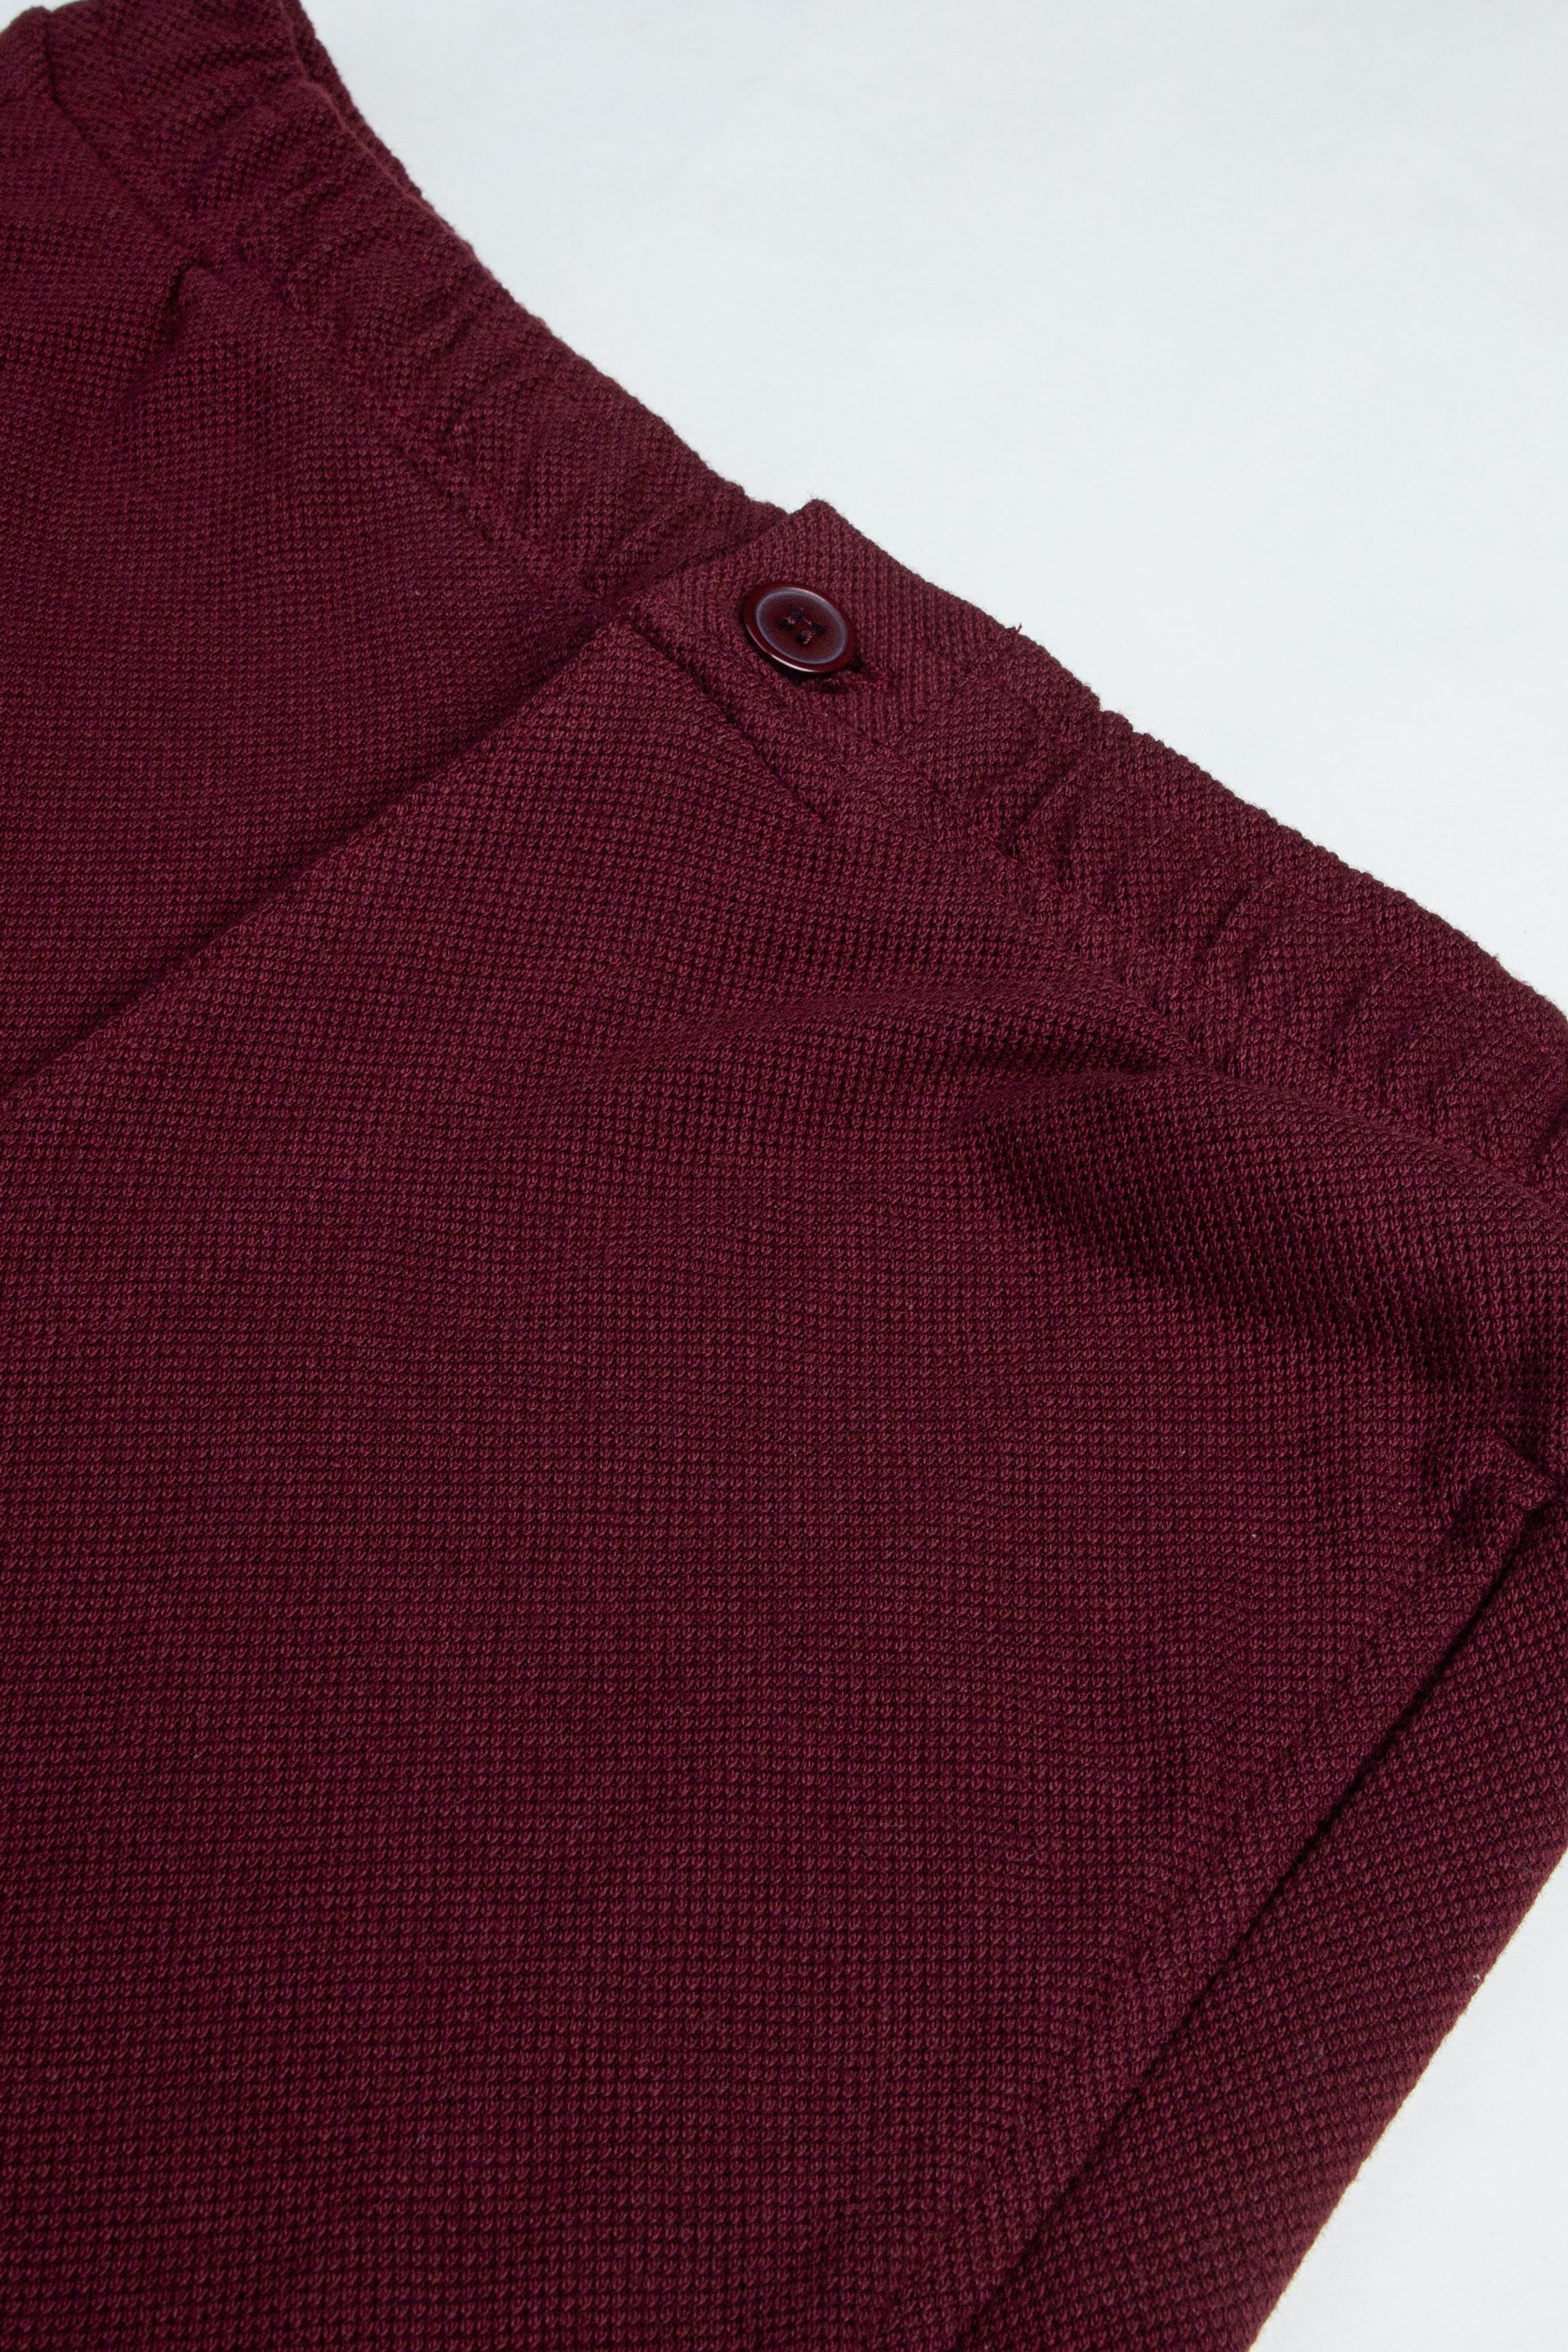 Maroon Terry Trousers